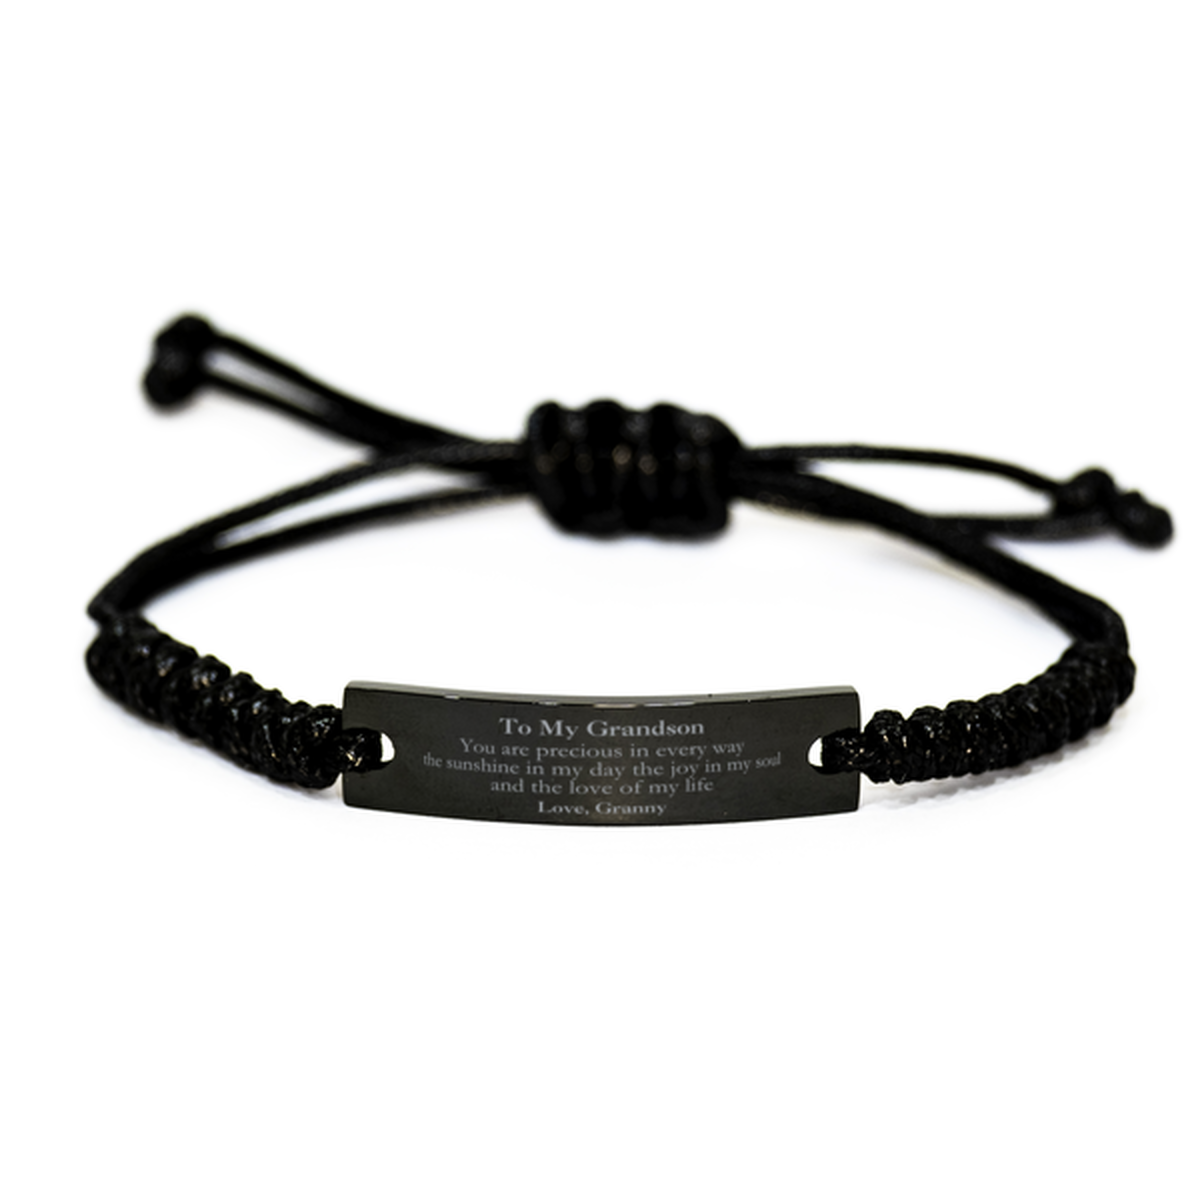 Graduation Gifts for Grandson Black Rope Bracelet Present from Granny, Christmas Grandson Birthday Gifts Grandson You are precious in every way the sunshine in my day. Love, Granny